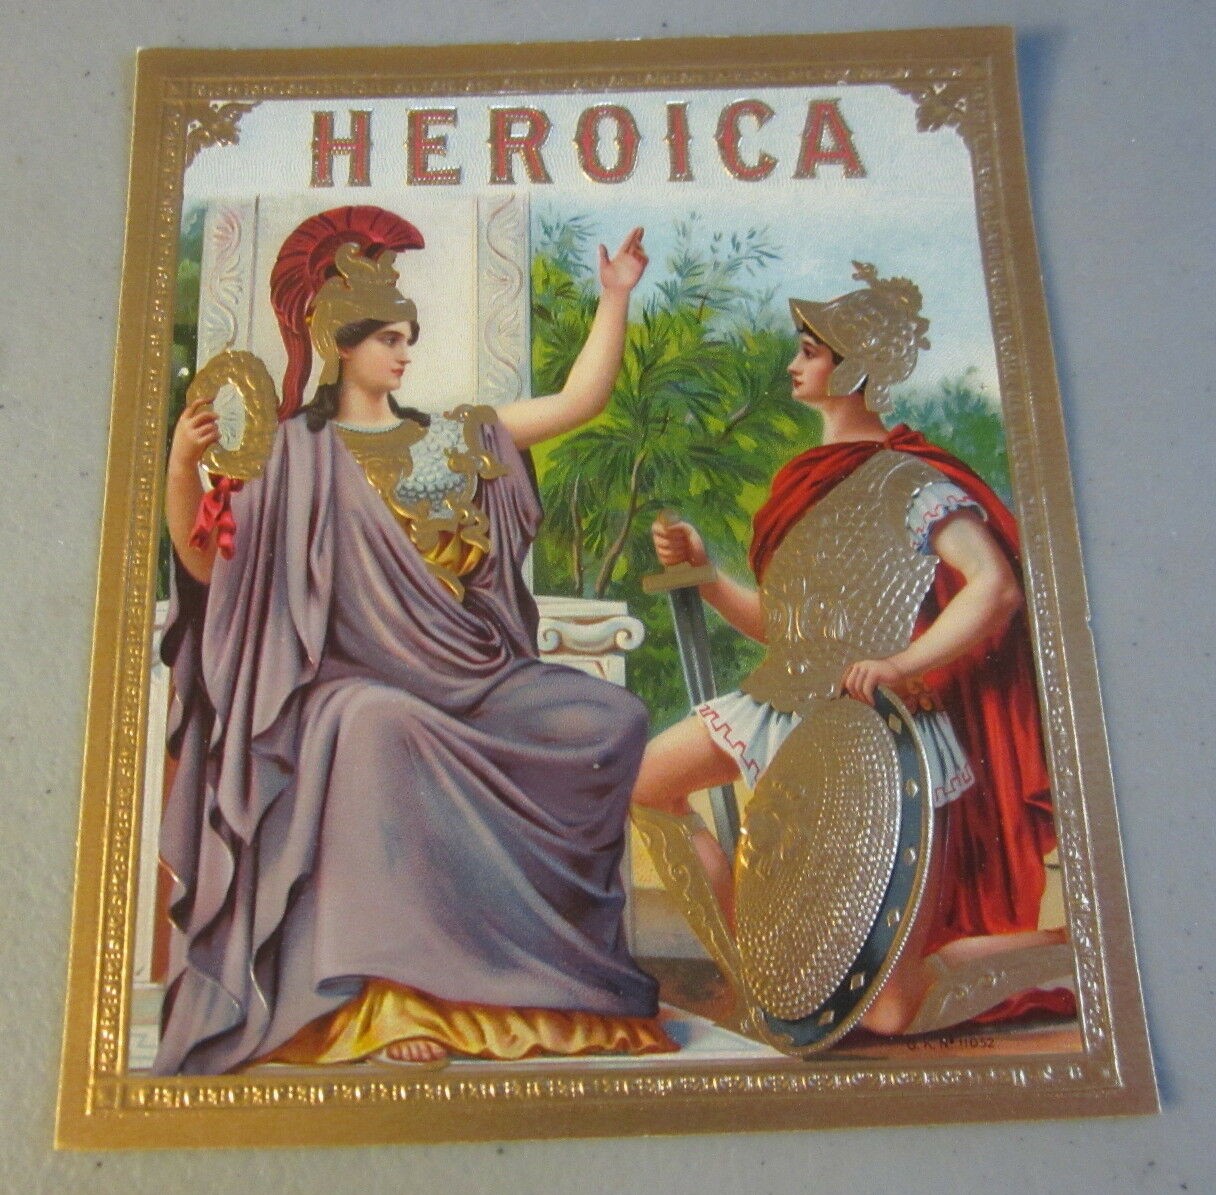  Old Antique - HEROICA - Outer CIGAR Box LABEL ...